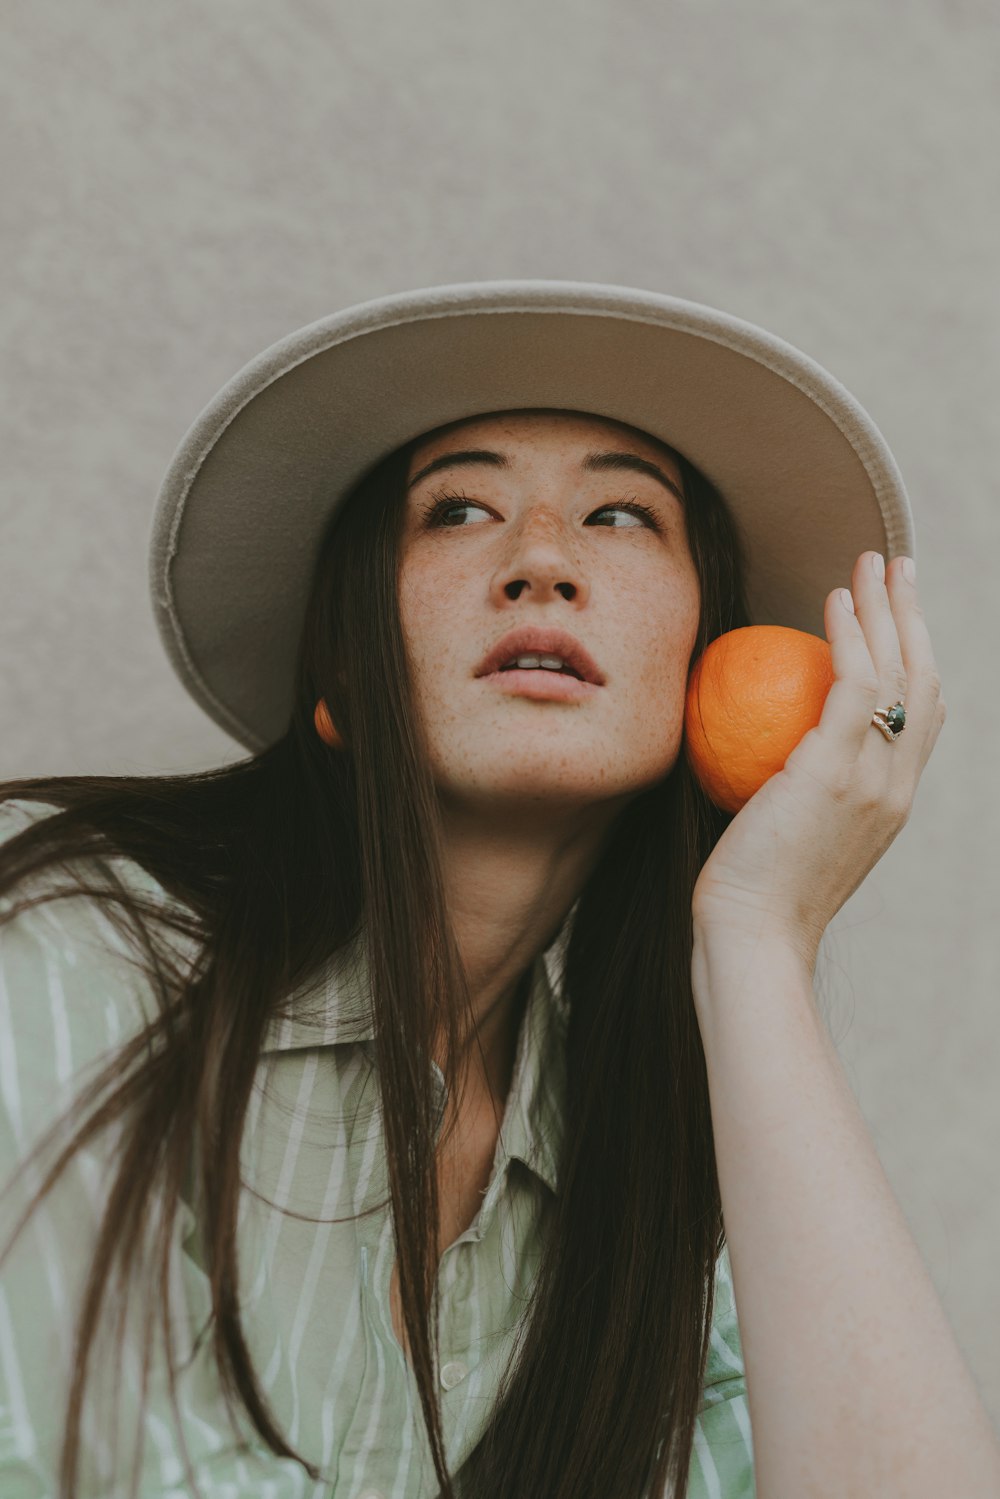 a woman wearing a hat and holding a carrot